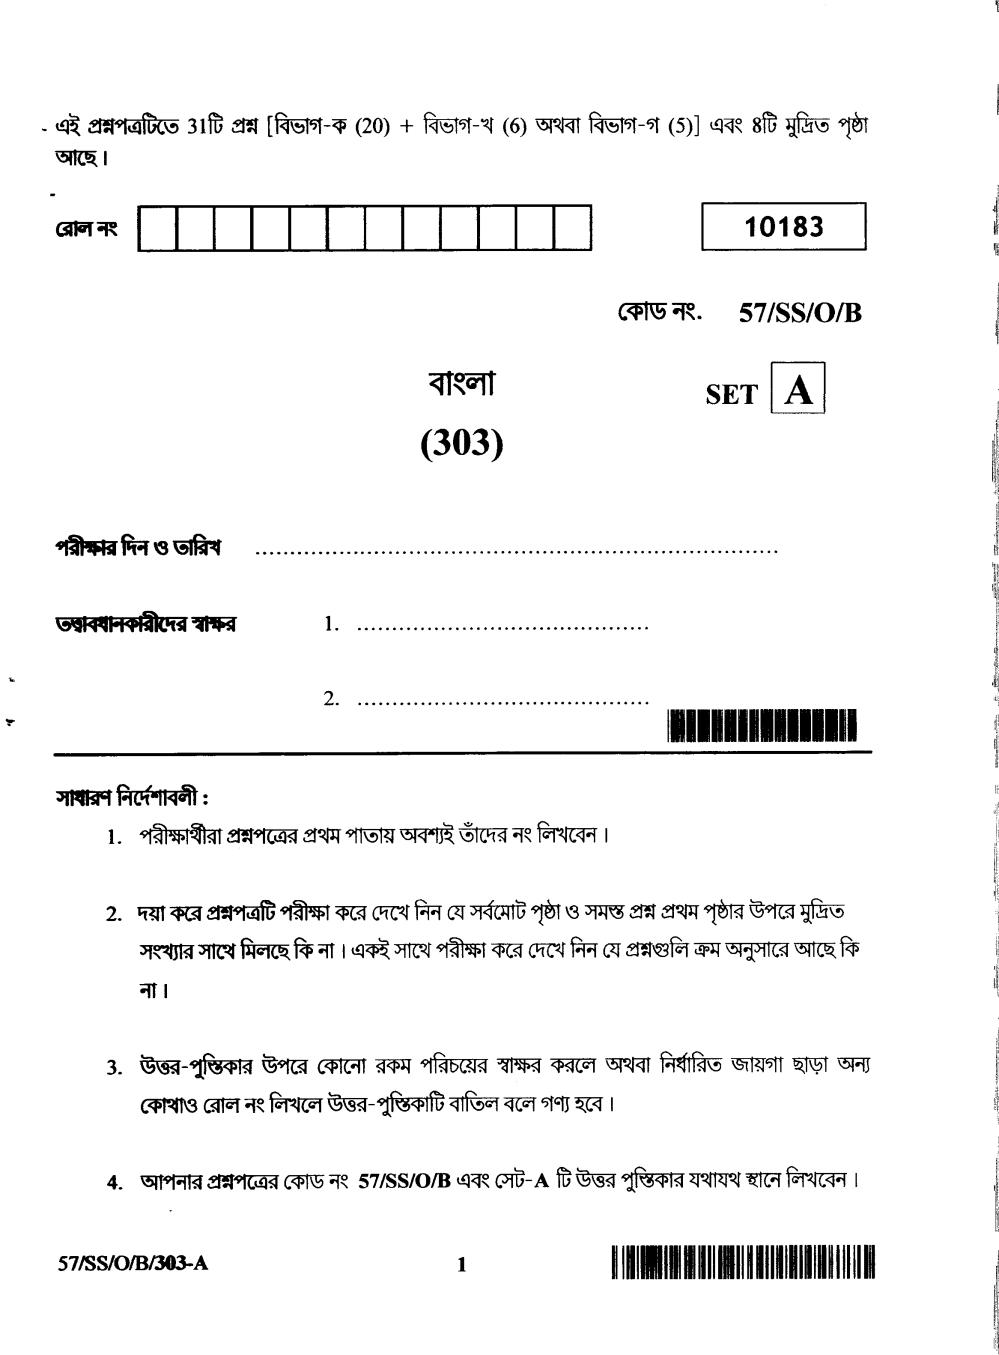 NIOS Class 12 Question Paper Oct 2018 - Bengali - Page 1